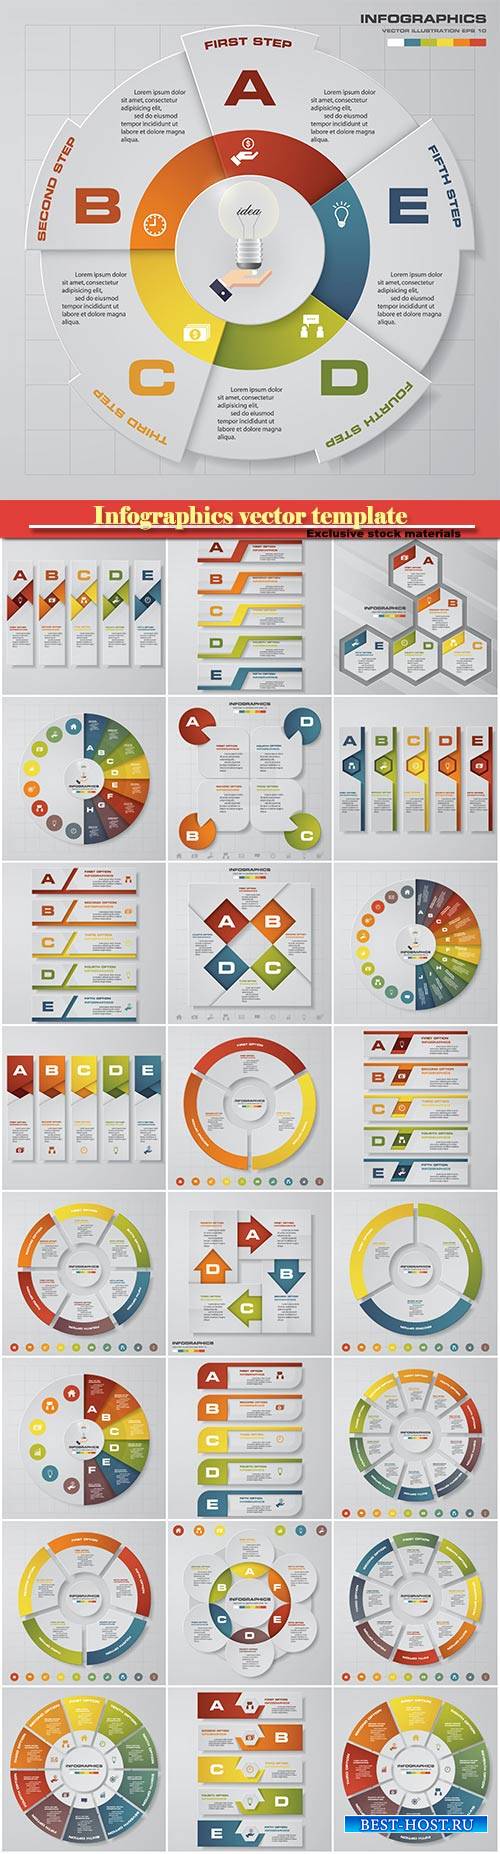 Infographics vector template for business presentations or information banner #3